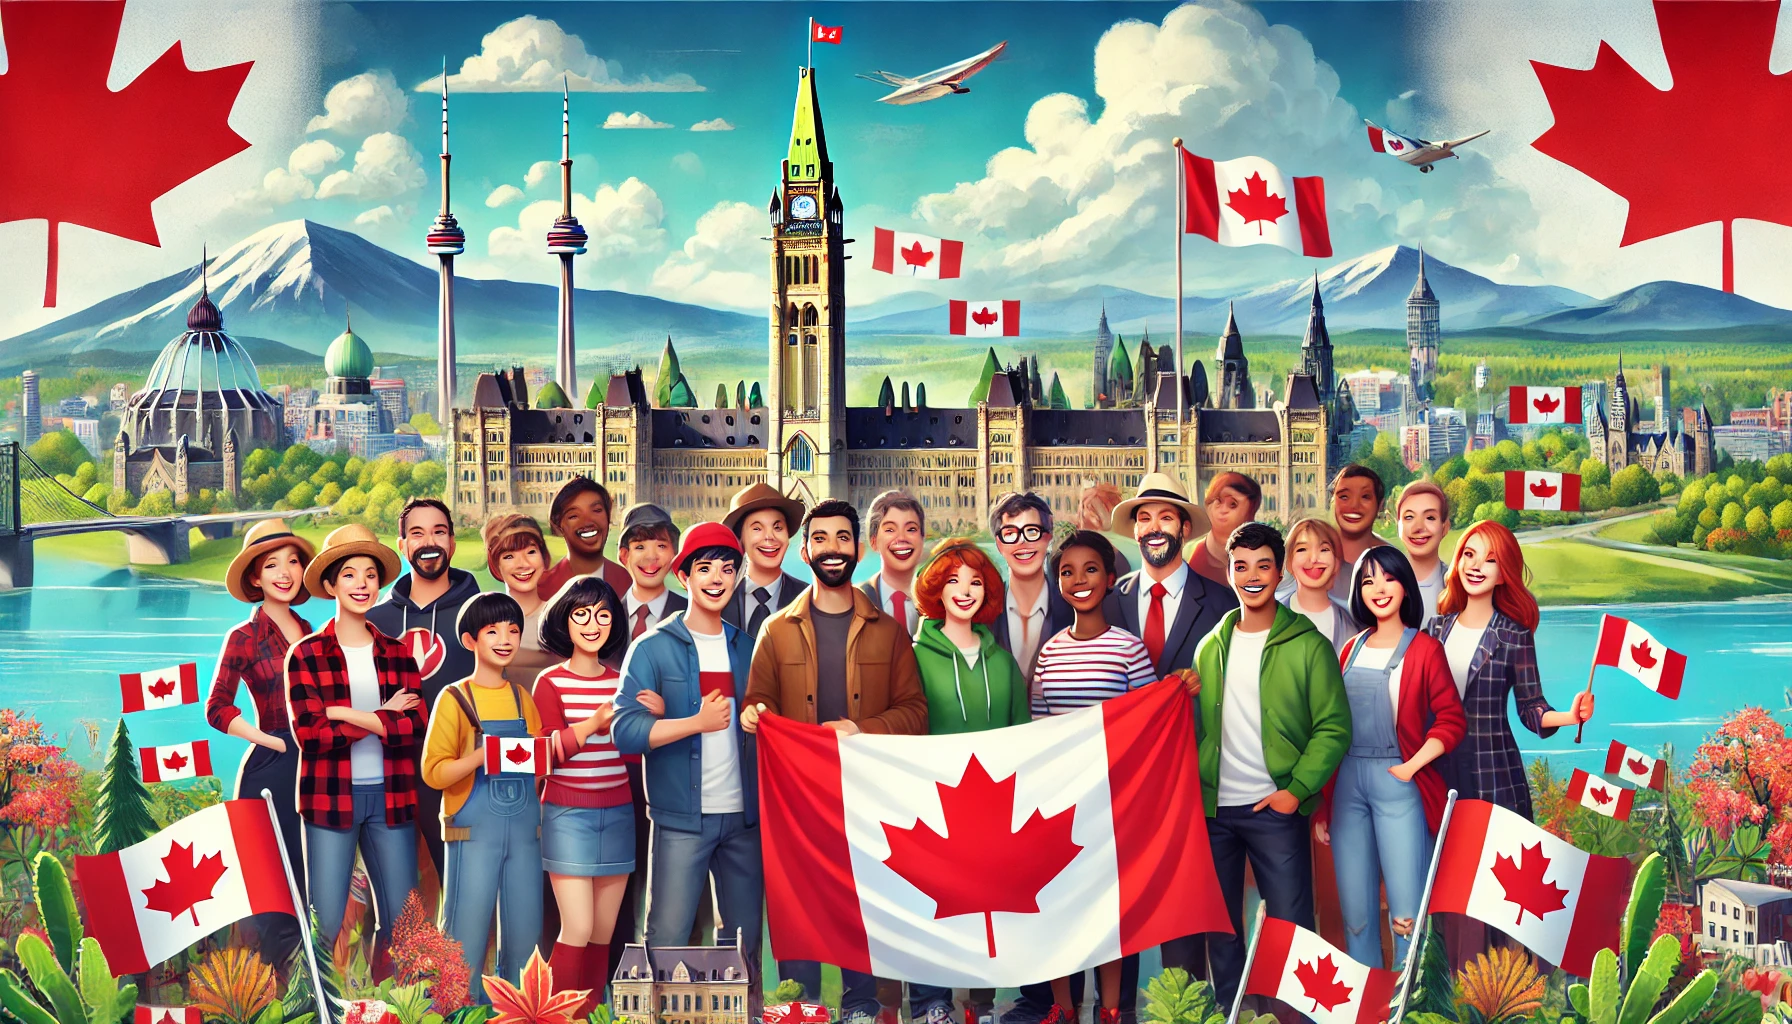 Diverse group of people with Canadian flags